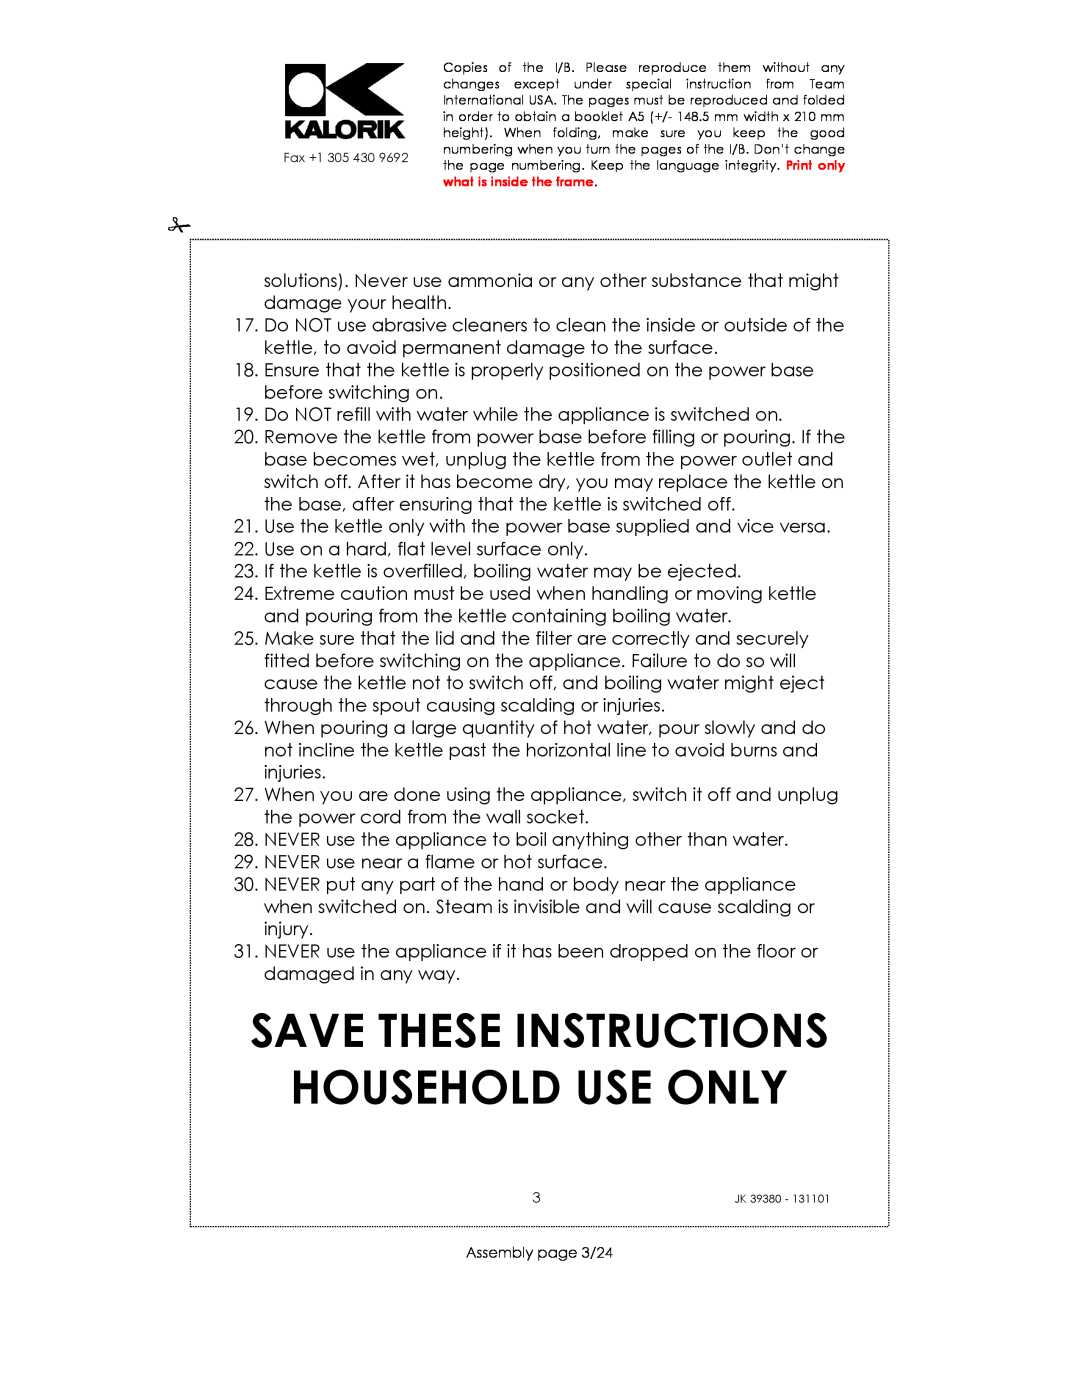 Kalorik JK 39380 manual Save These Instructions Household Use Only 